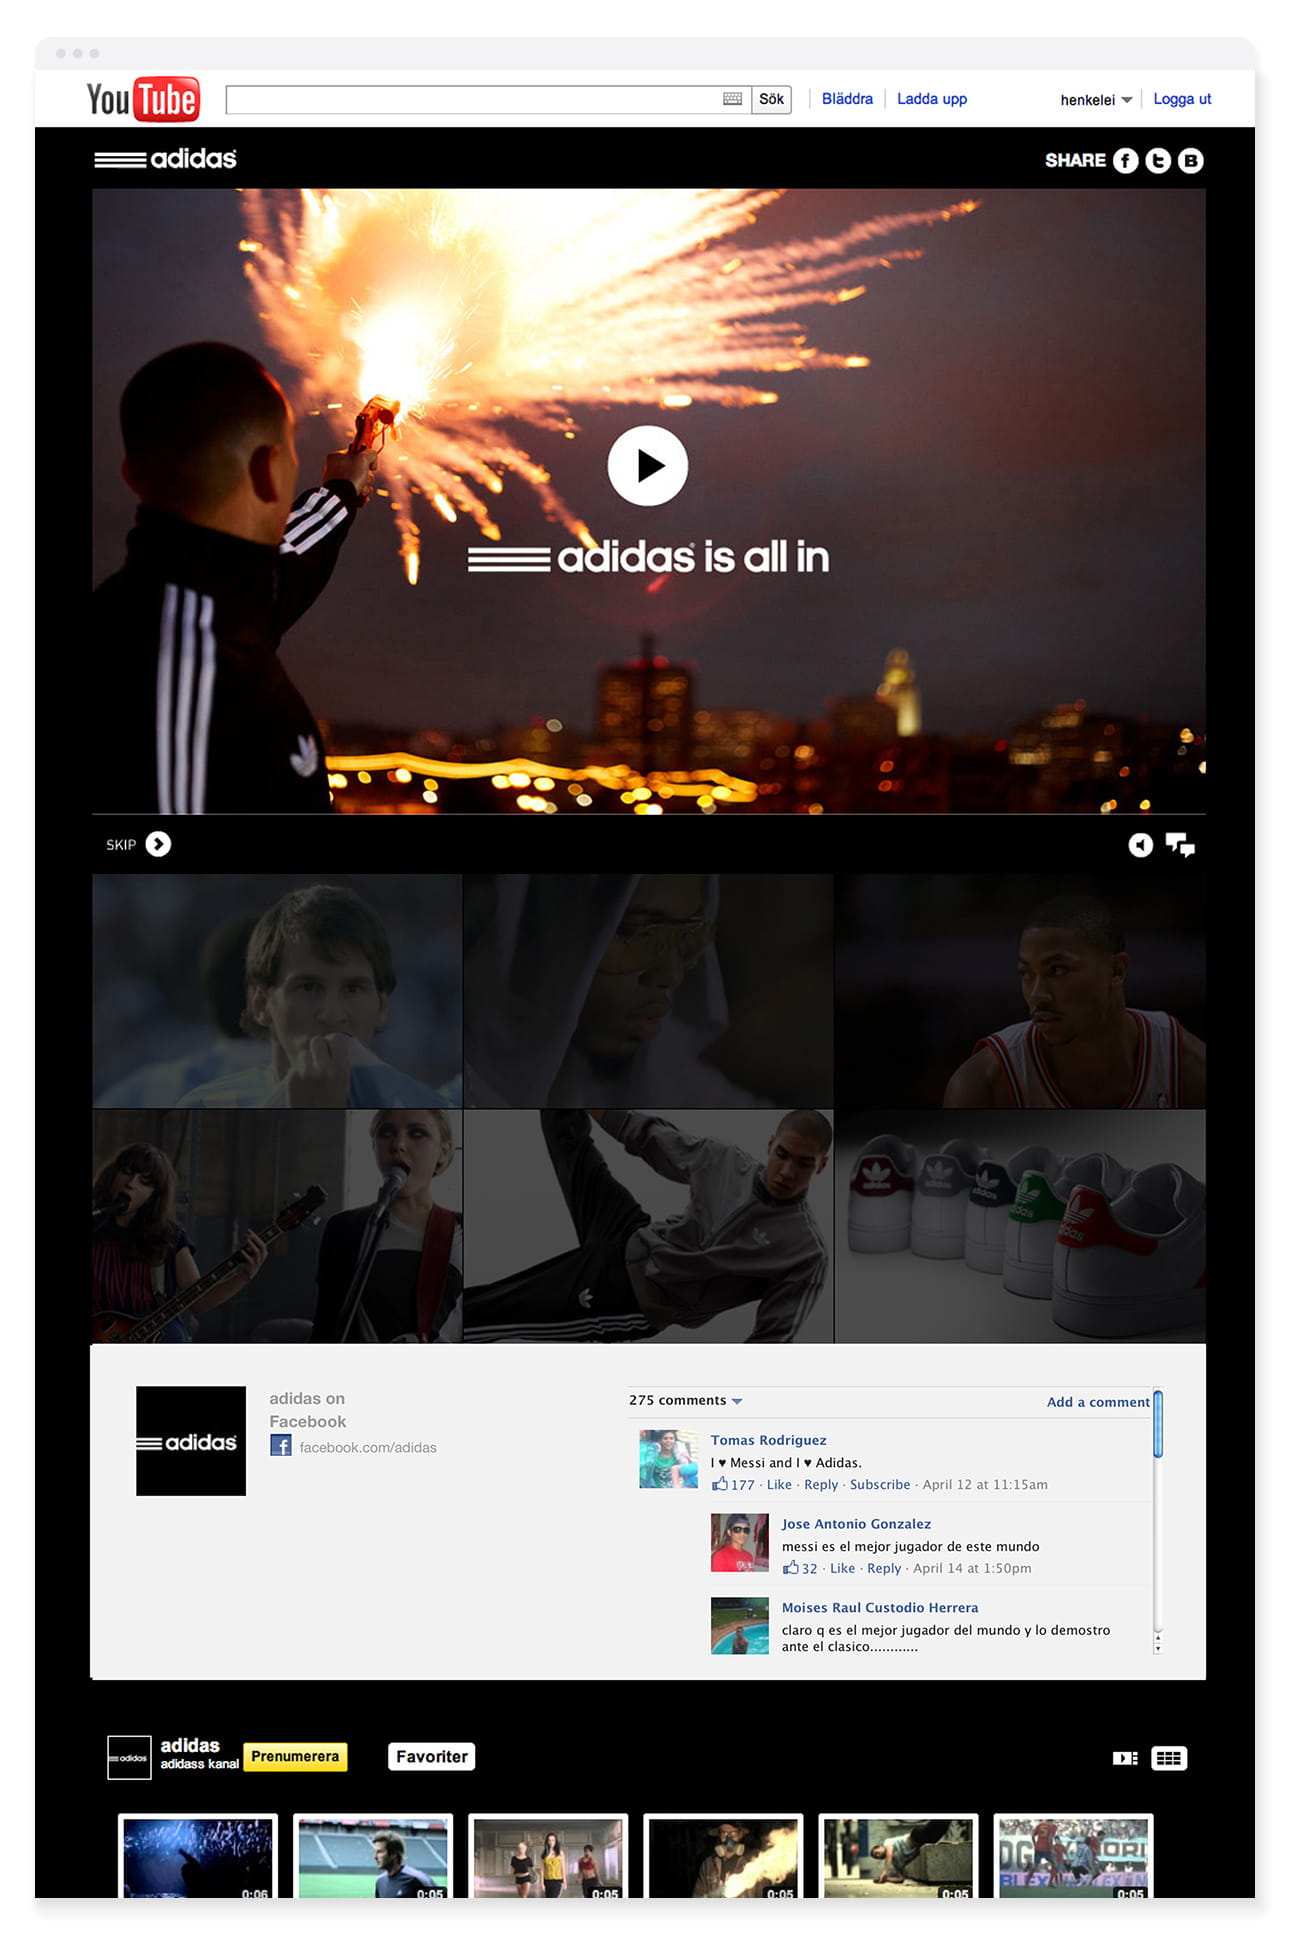 adidas all in youtube